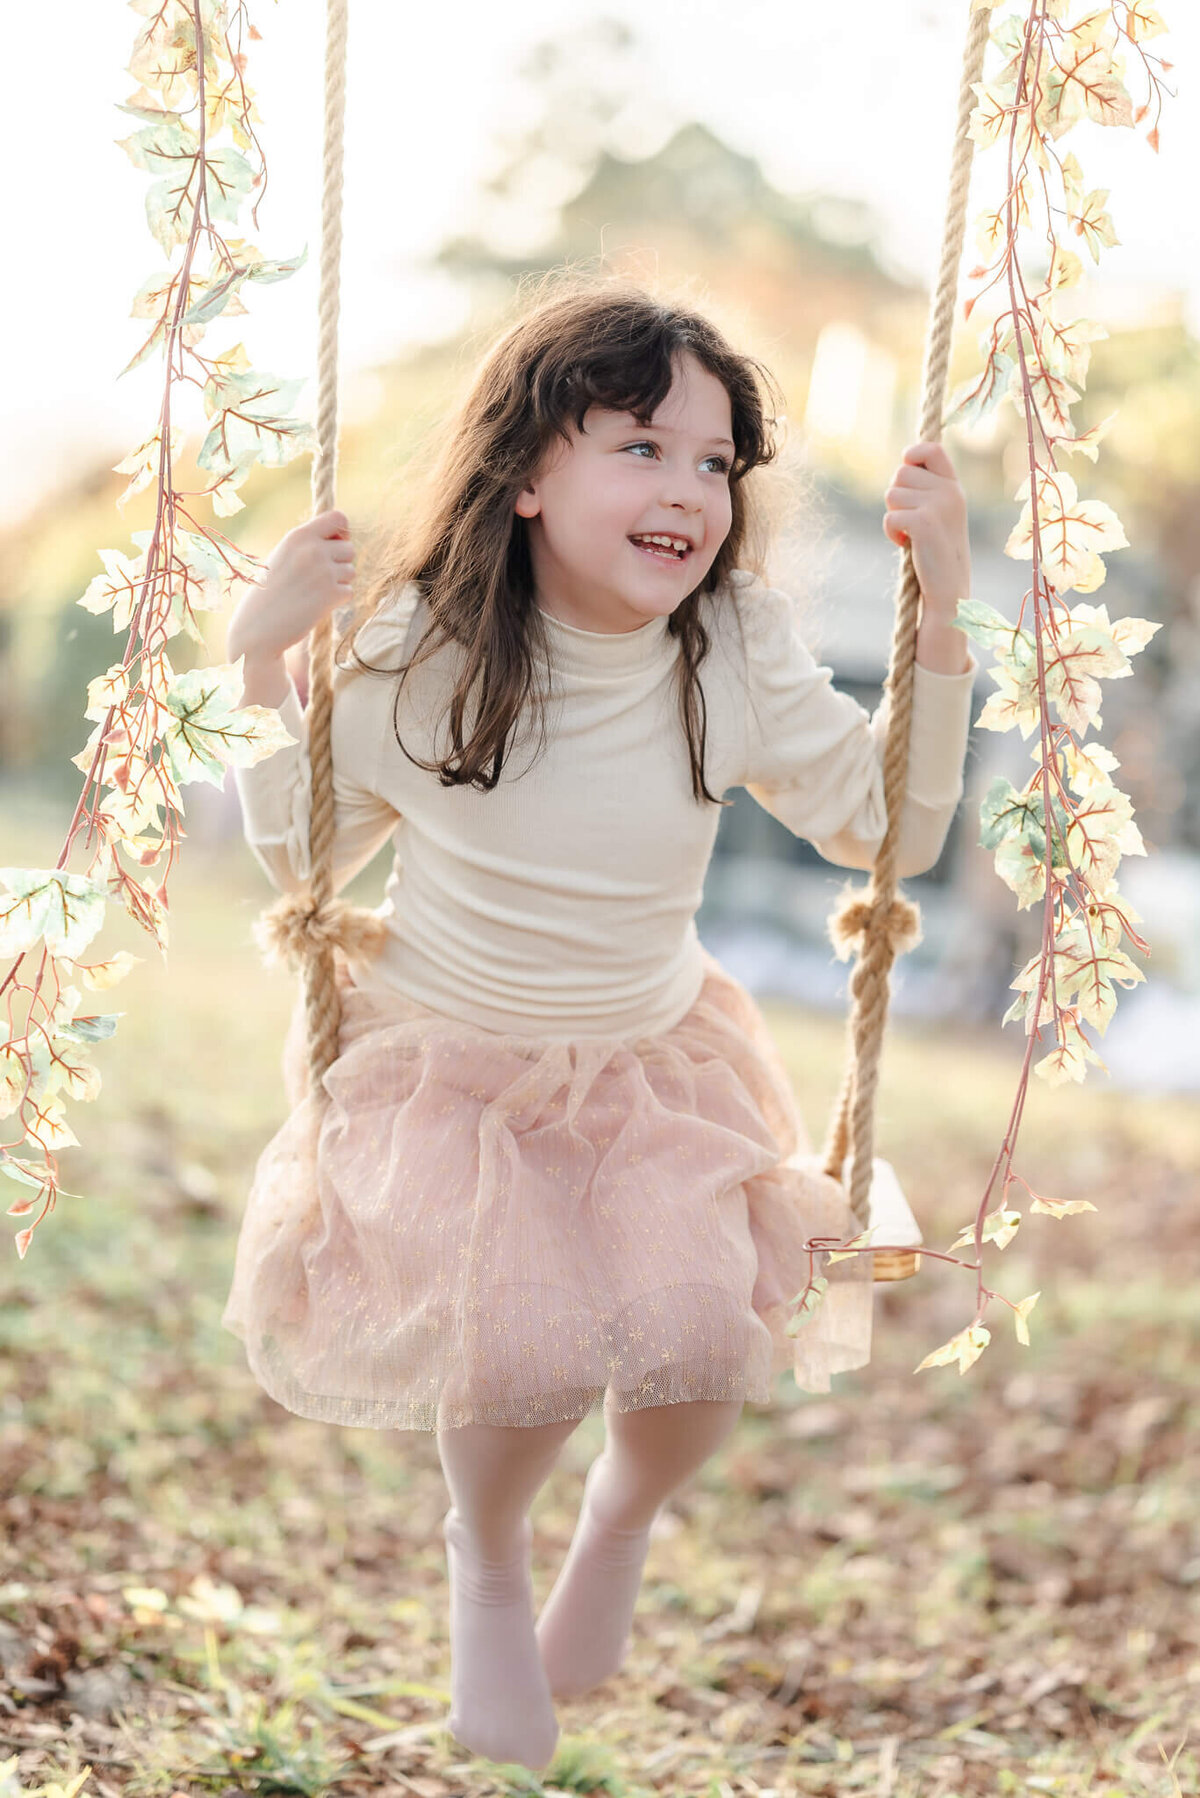 A young girl, wearing pink and cream smiles as she swings on a wooden swing at Disheveled Decor in Virginia Beach.